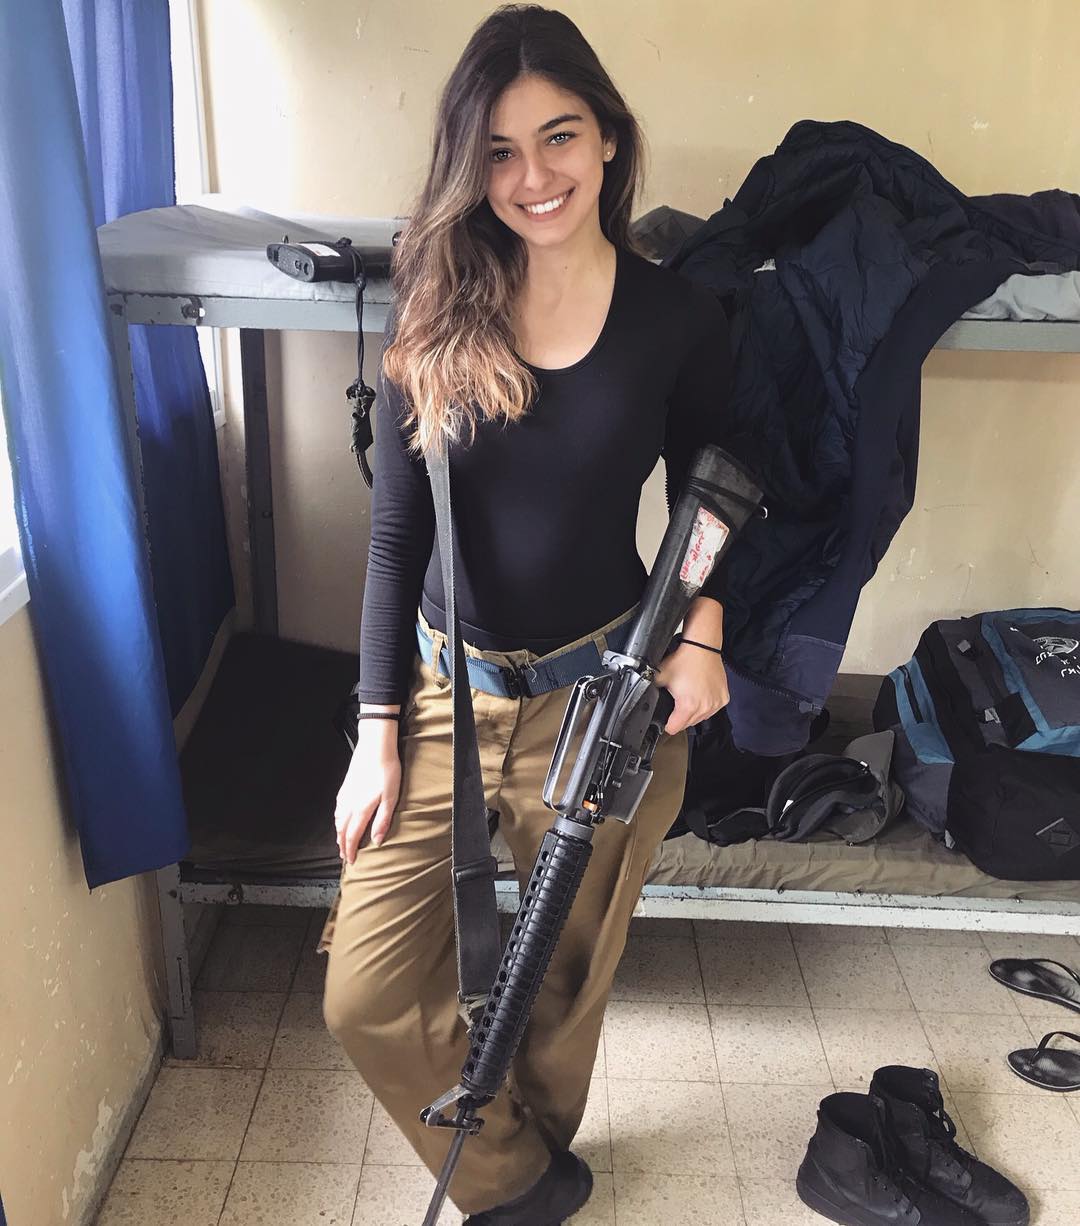 Surprised by the hot body of 2 Israeli female soldiers when leaving uniform - 1